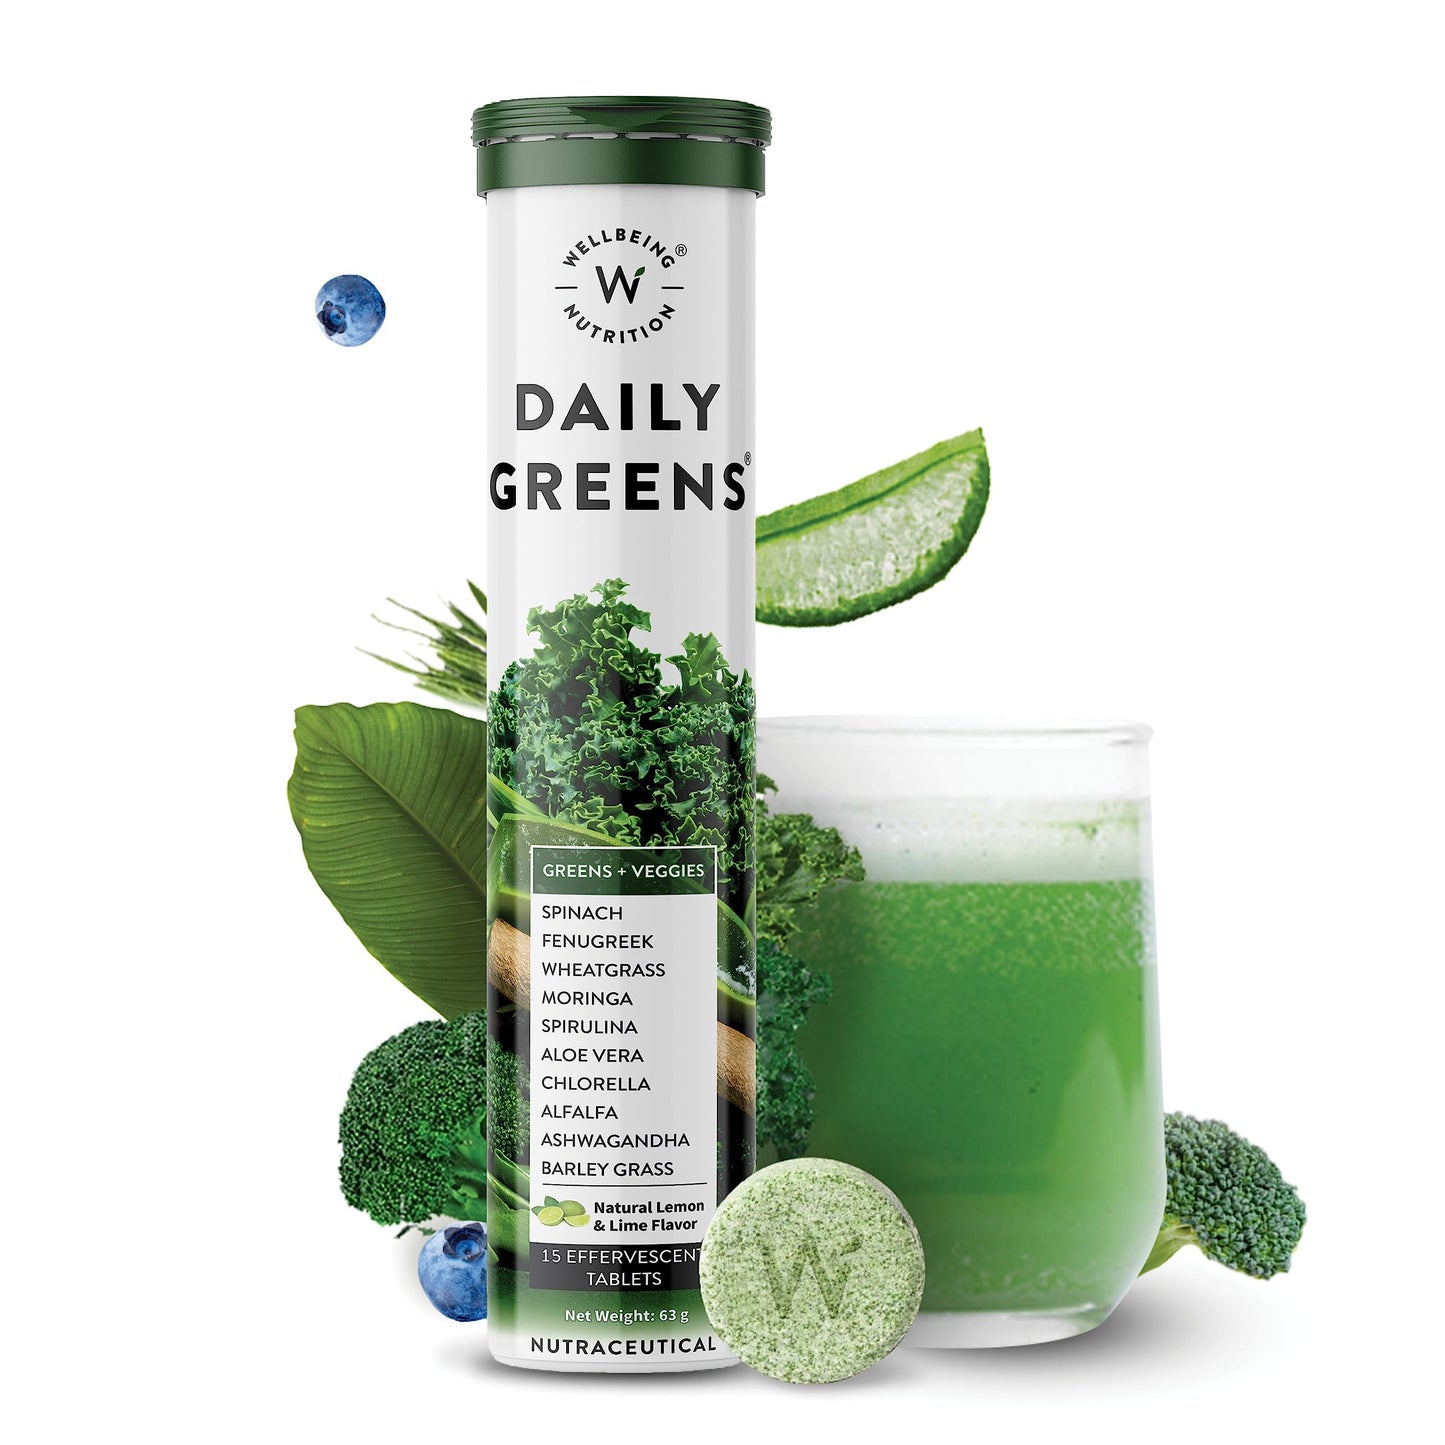 Wellbeing Nutrition Daily Greens, Wholefood Multivitamin with Vitamin C, Zinc, B6, B12, Iron for Immunity and Detox with 39+ Organic Certified Plant Superfoods & Antioxidants(15 Effervescent Tablets)